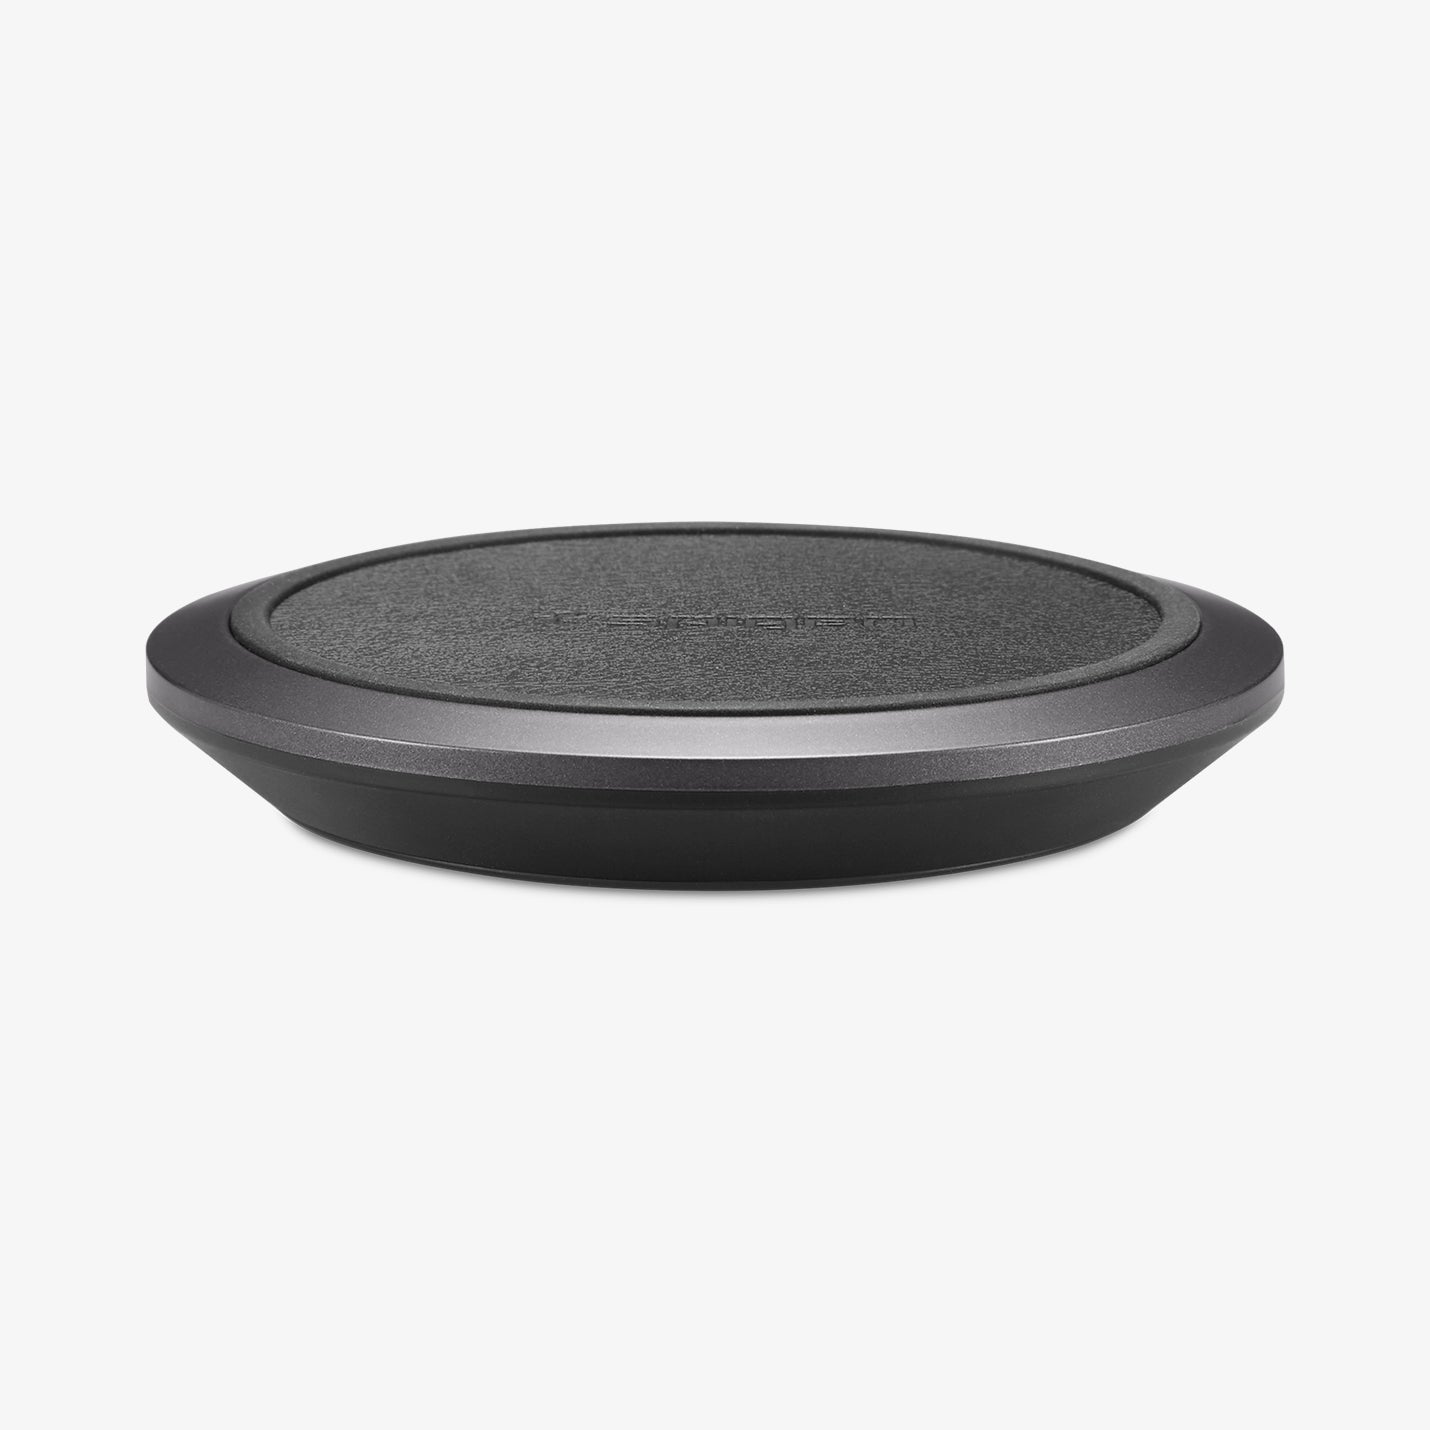 000CH23122 - Essential® Leather Designed 10W Wireless Charger F308W in black showing the front and partial top